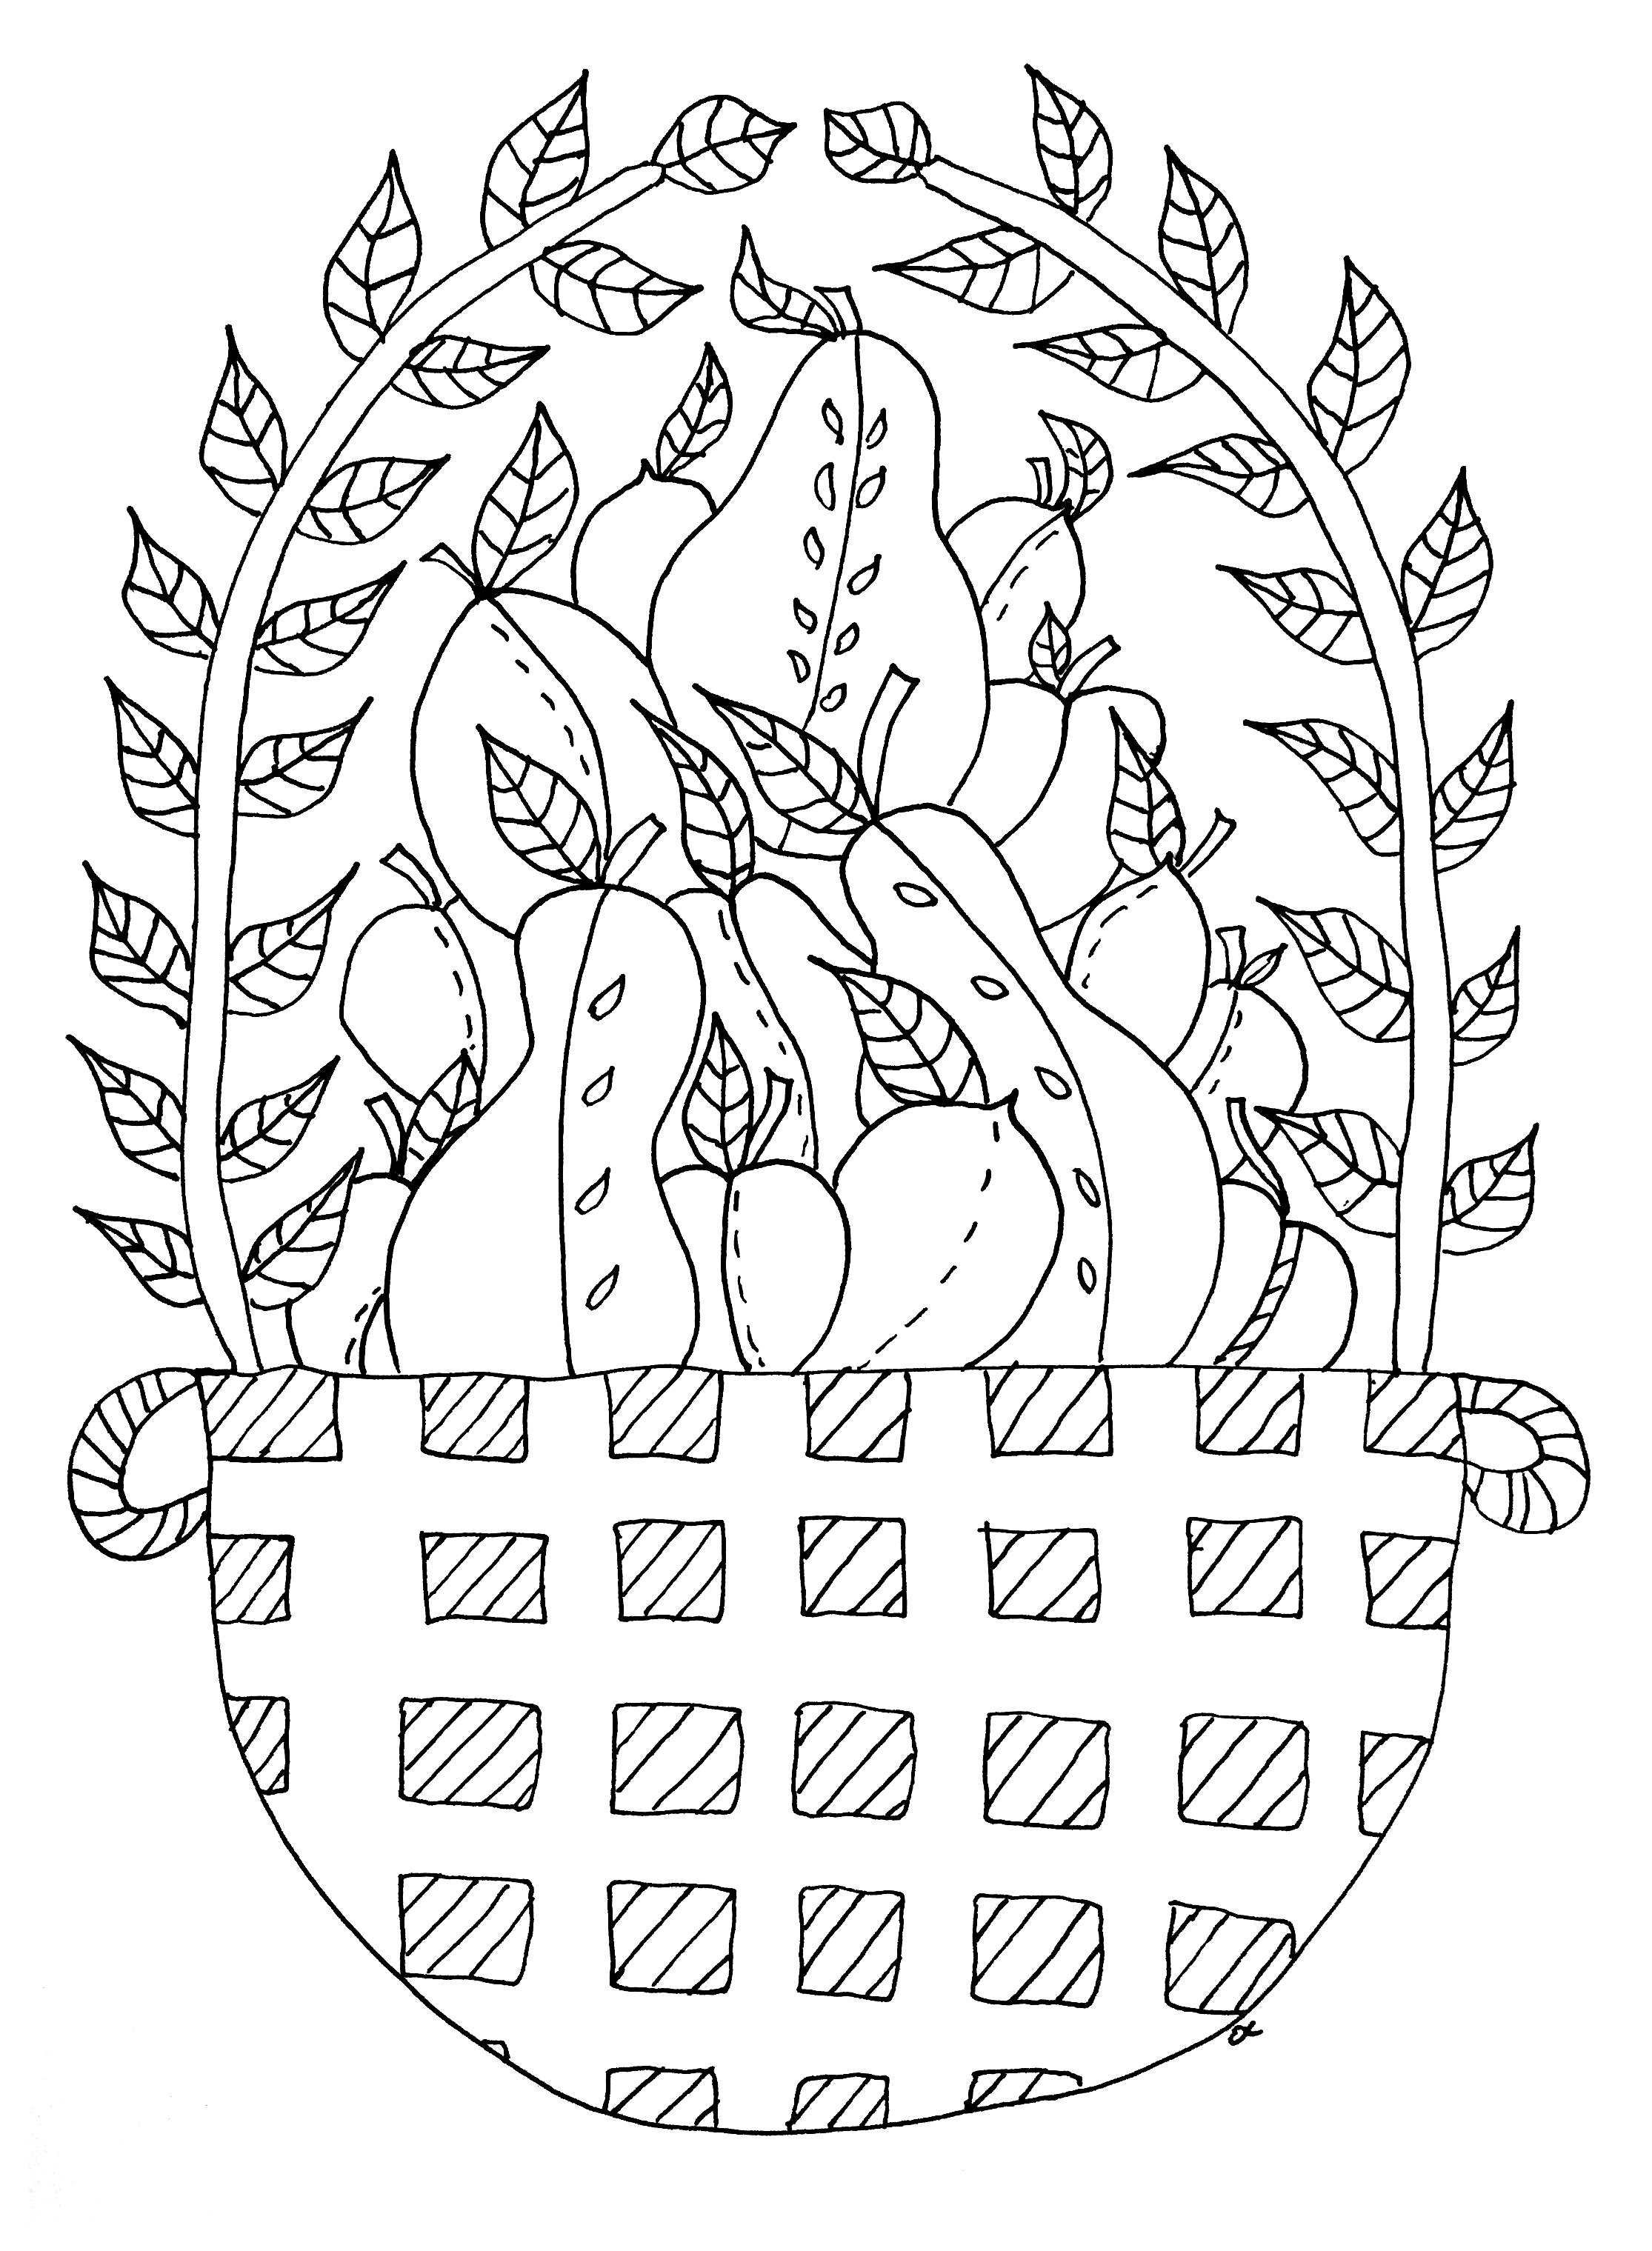 Download Fruit basket - Flowers Adult Coloring Pages